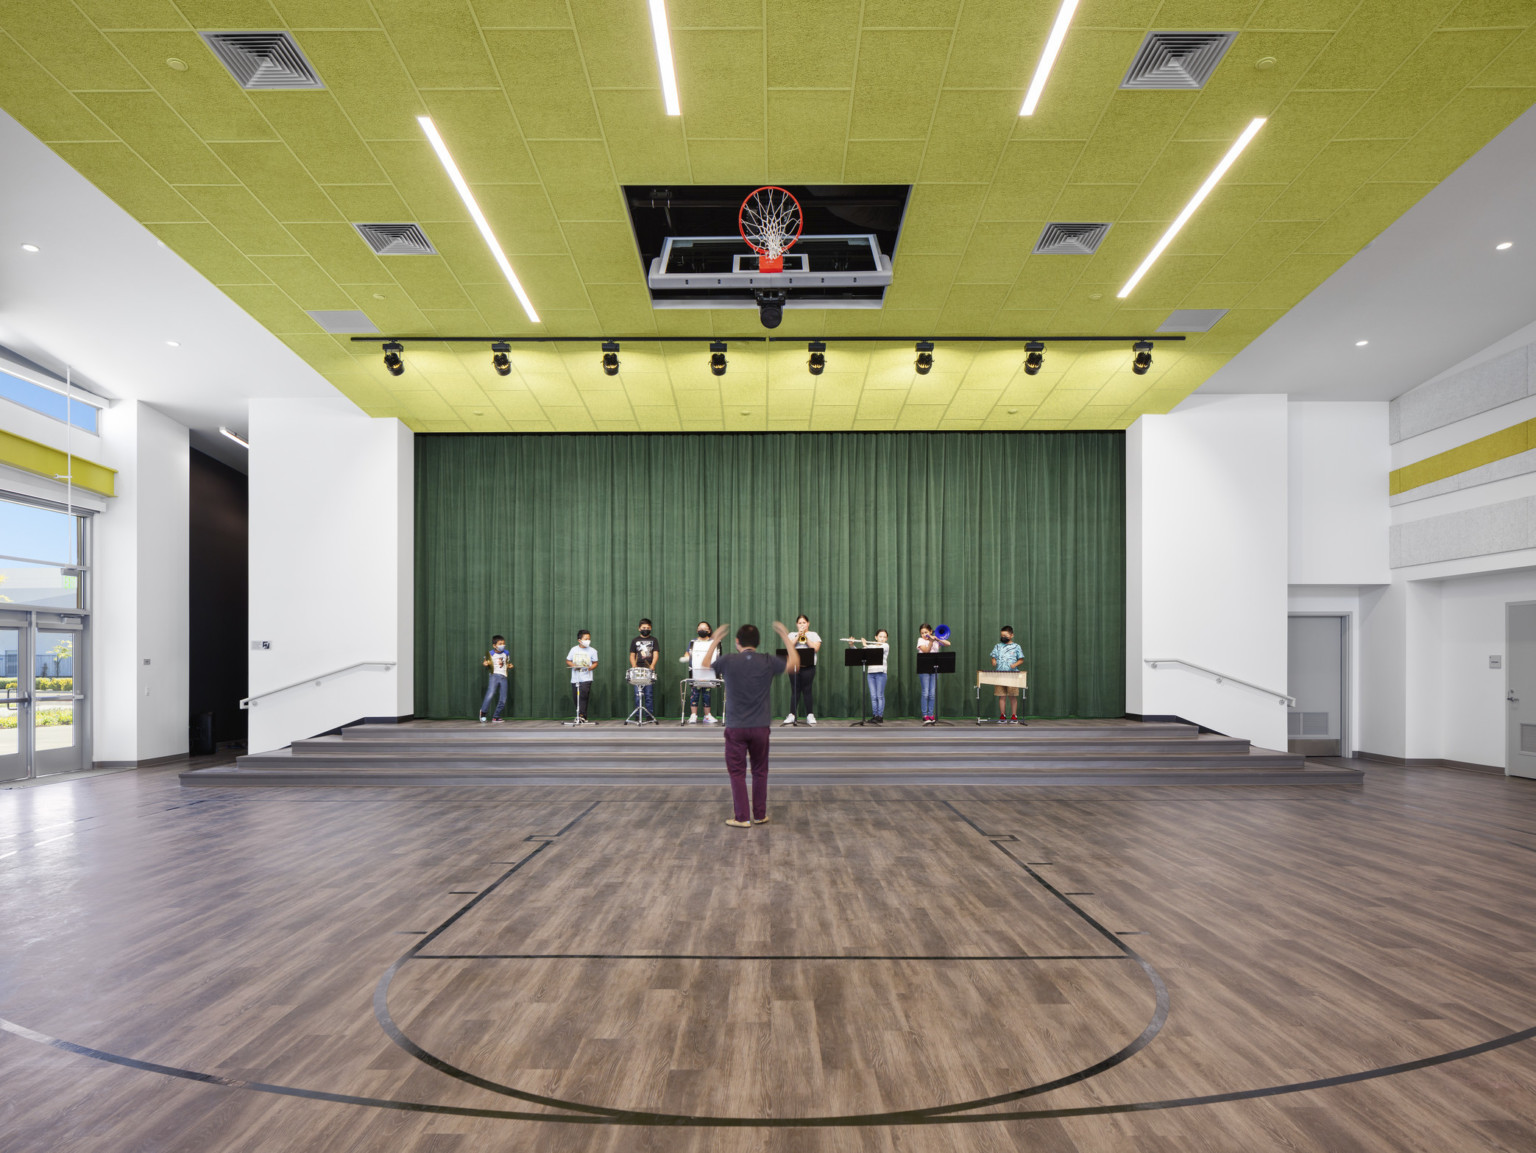 Interior gymnasium with stage in use. Green ceiling and stage curtains. Basketball hoop lifts into ceiling for performance